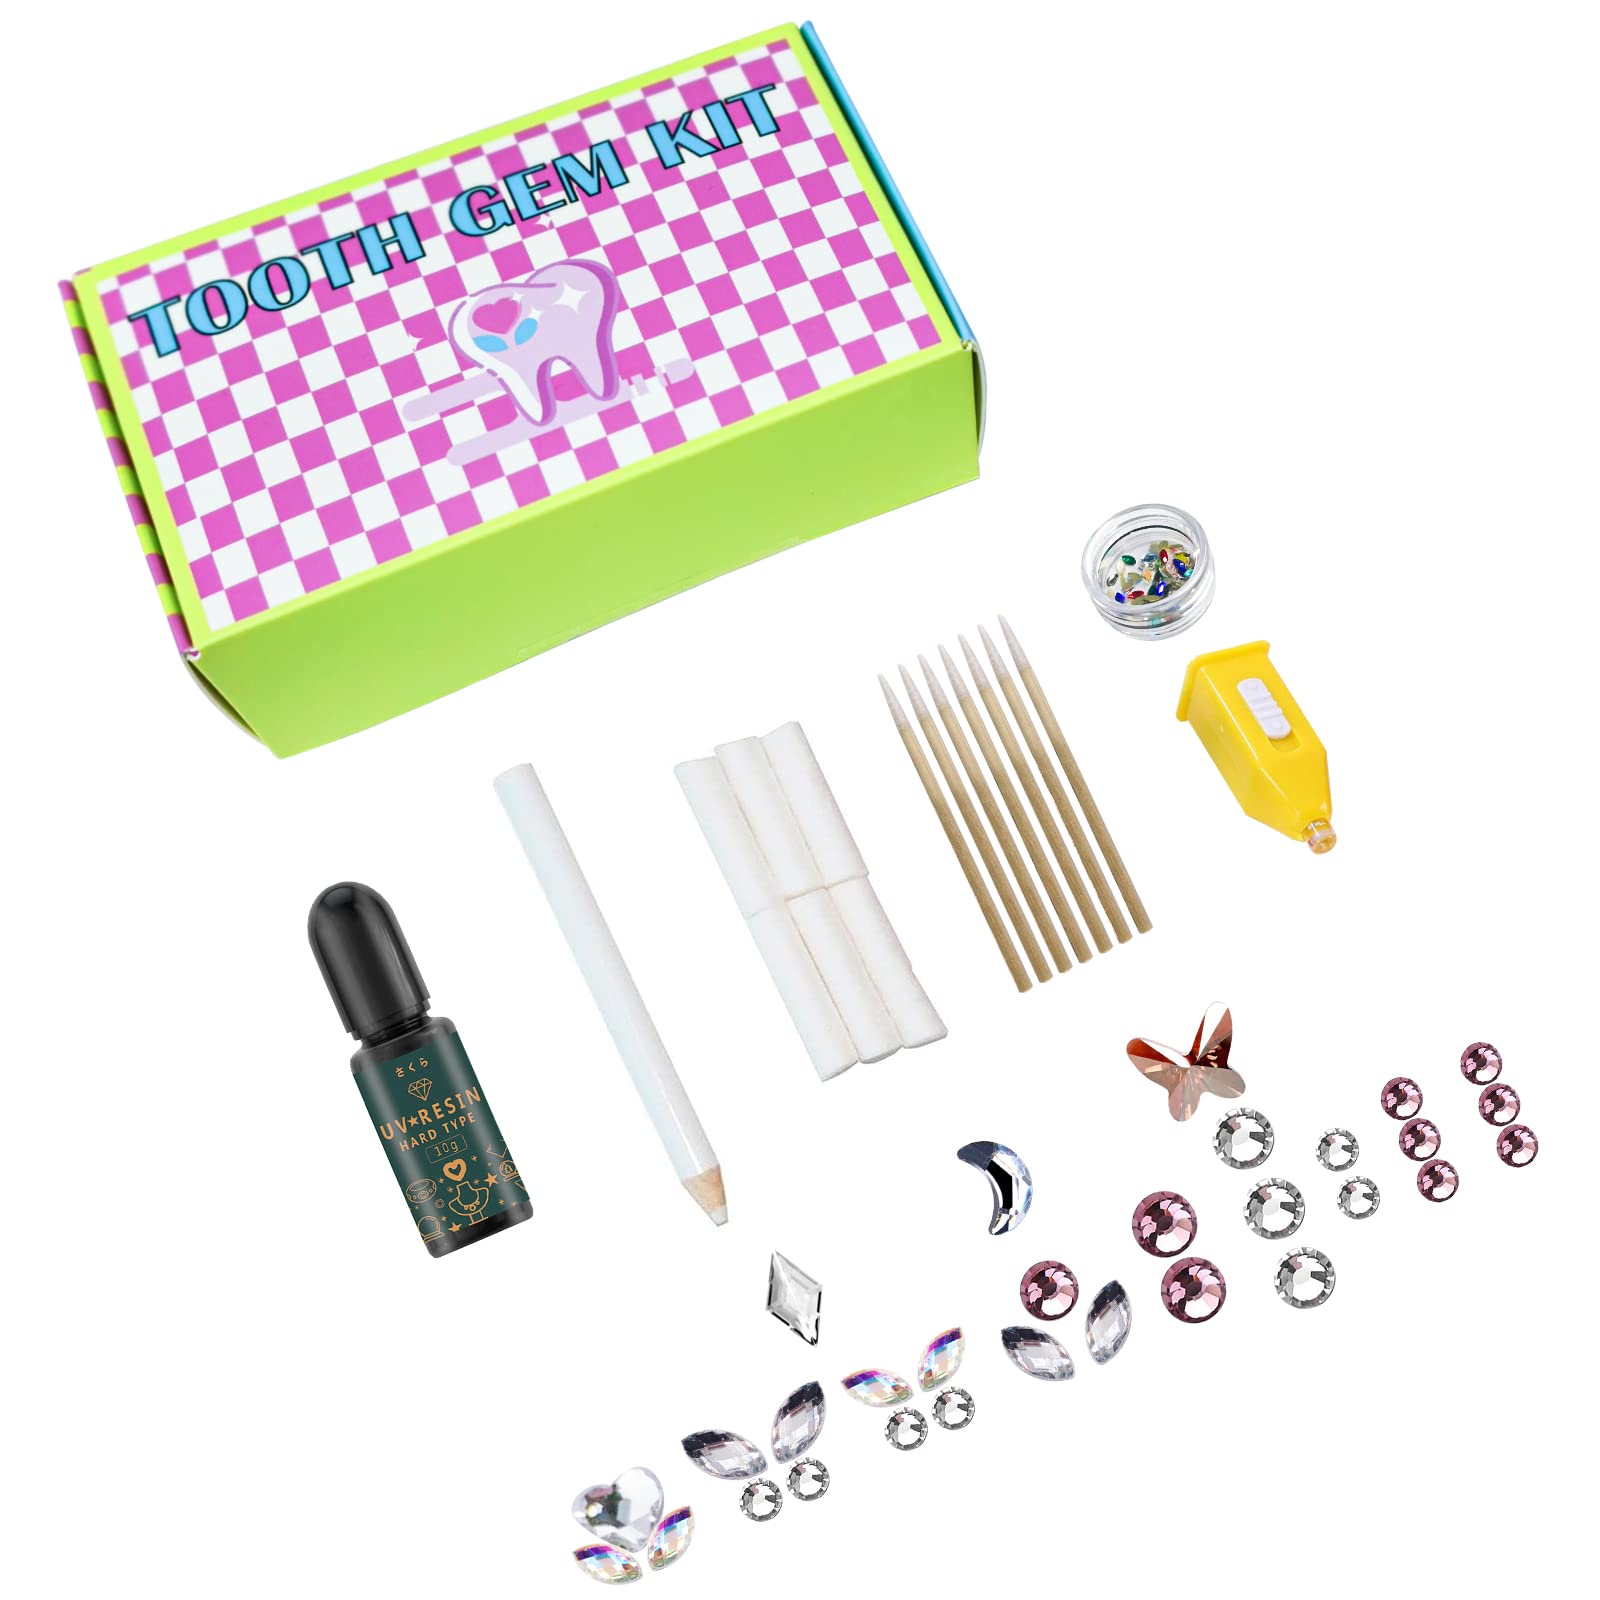 THE OFFICIAL DIY TOOTH GEM KIT - SHAPED CRYSTALS